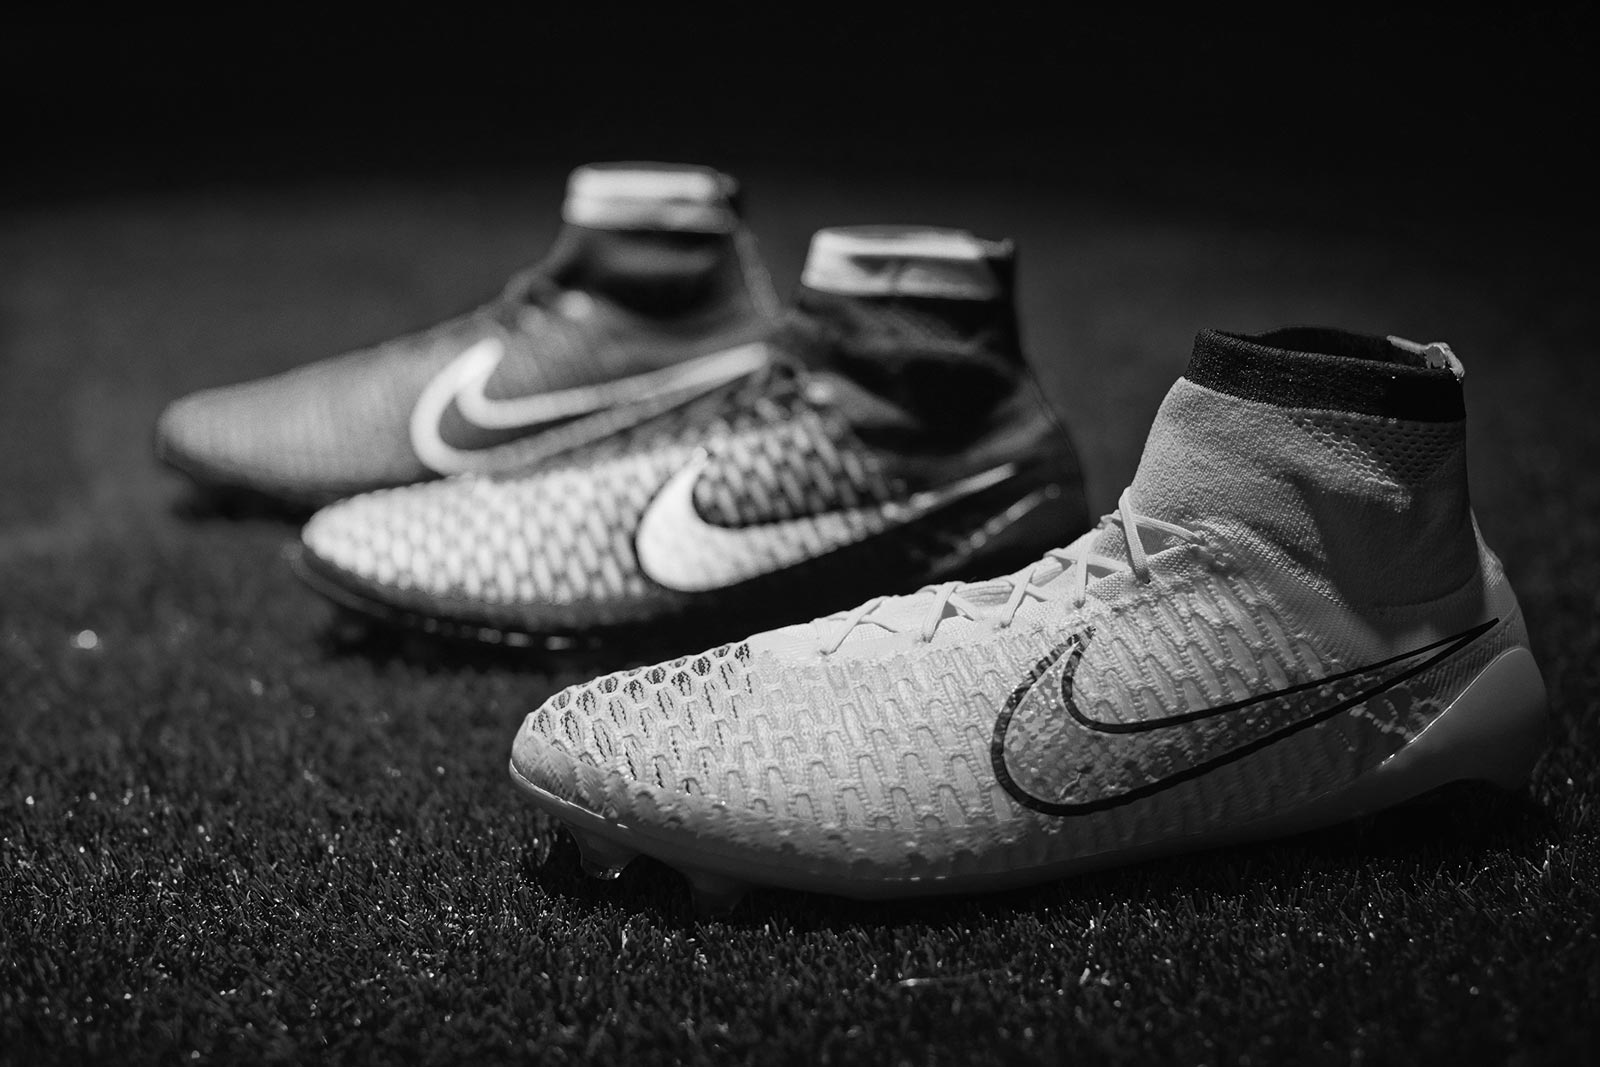 Exclusive: FTR10 Features, Colorway, Release Date - All About the Boot That Will Replace the Magista - Headlines